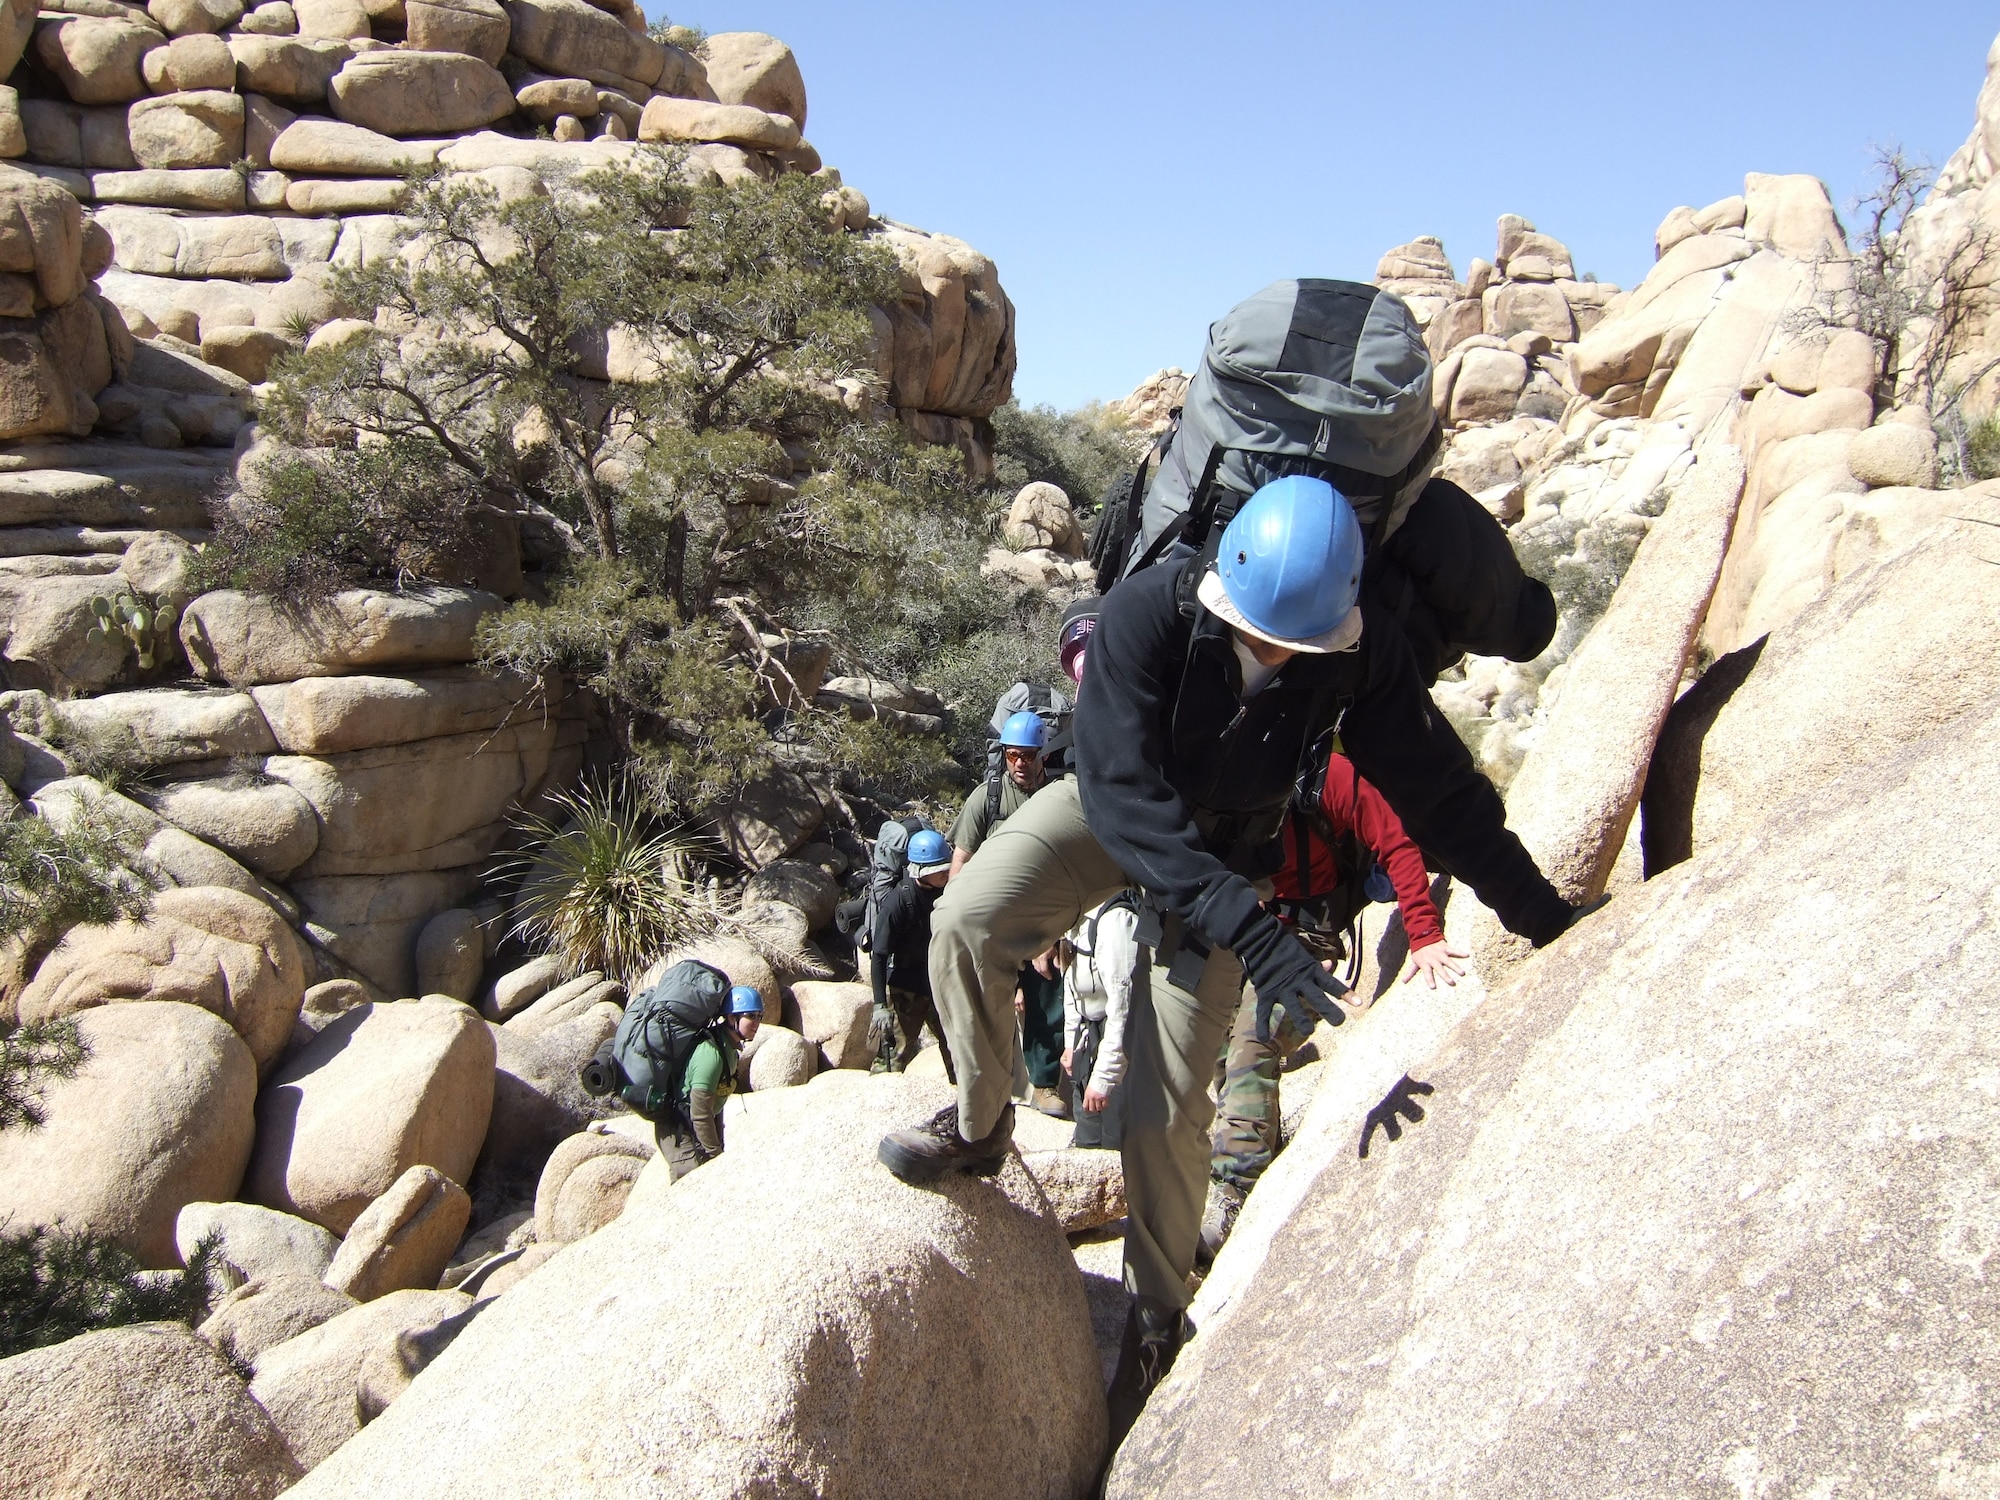 Staff Sgt. Lindsay Howard leads a group negotiating over a relatively small obstacles in the "Wonderland of Rocks" in Joshua Tree National Park during a wilderness-based course run by the non-profit educational organization Outward Bound. US Air Force photo by Tech. Sgt. Robert Galusha